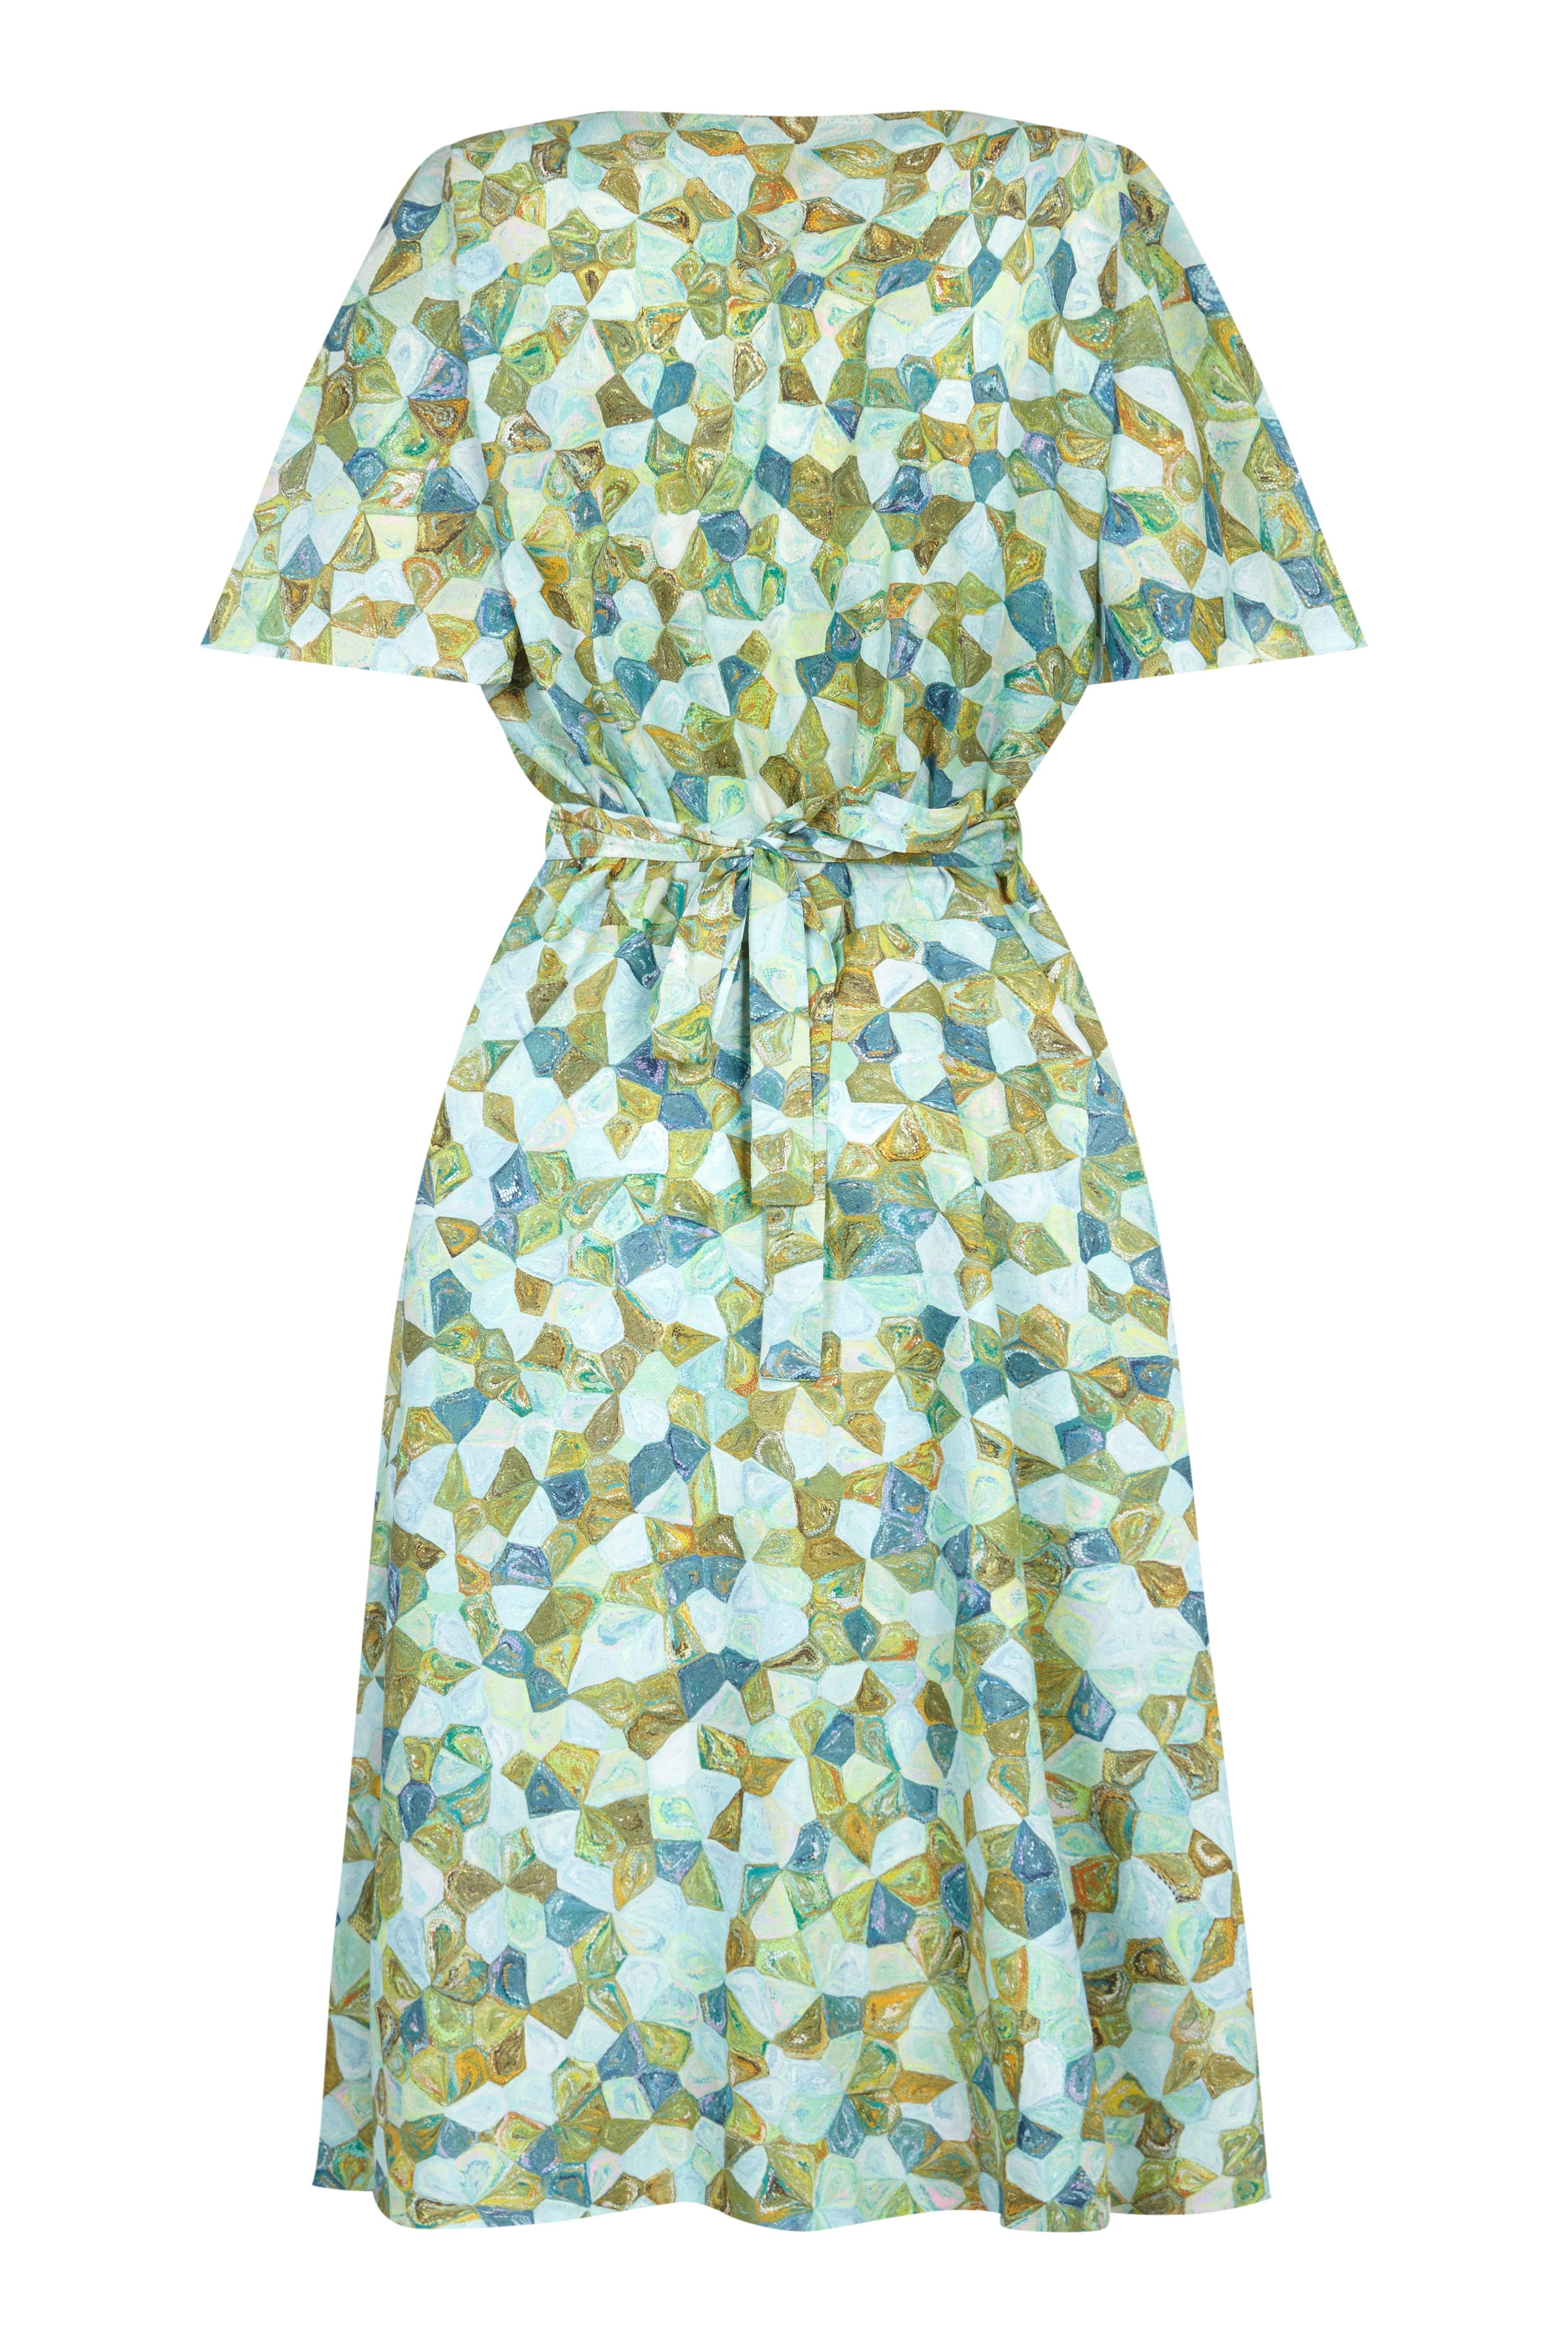 This pretty 1950s silk green patterned dress features an unusual kaleidoscope design in a variety of attractive shades of green and pale blue. The dress is deeply feminine with a full, ankle length skirt, and flared shirt sleeves that create soft